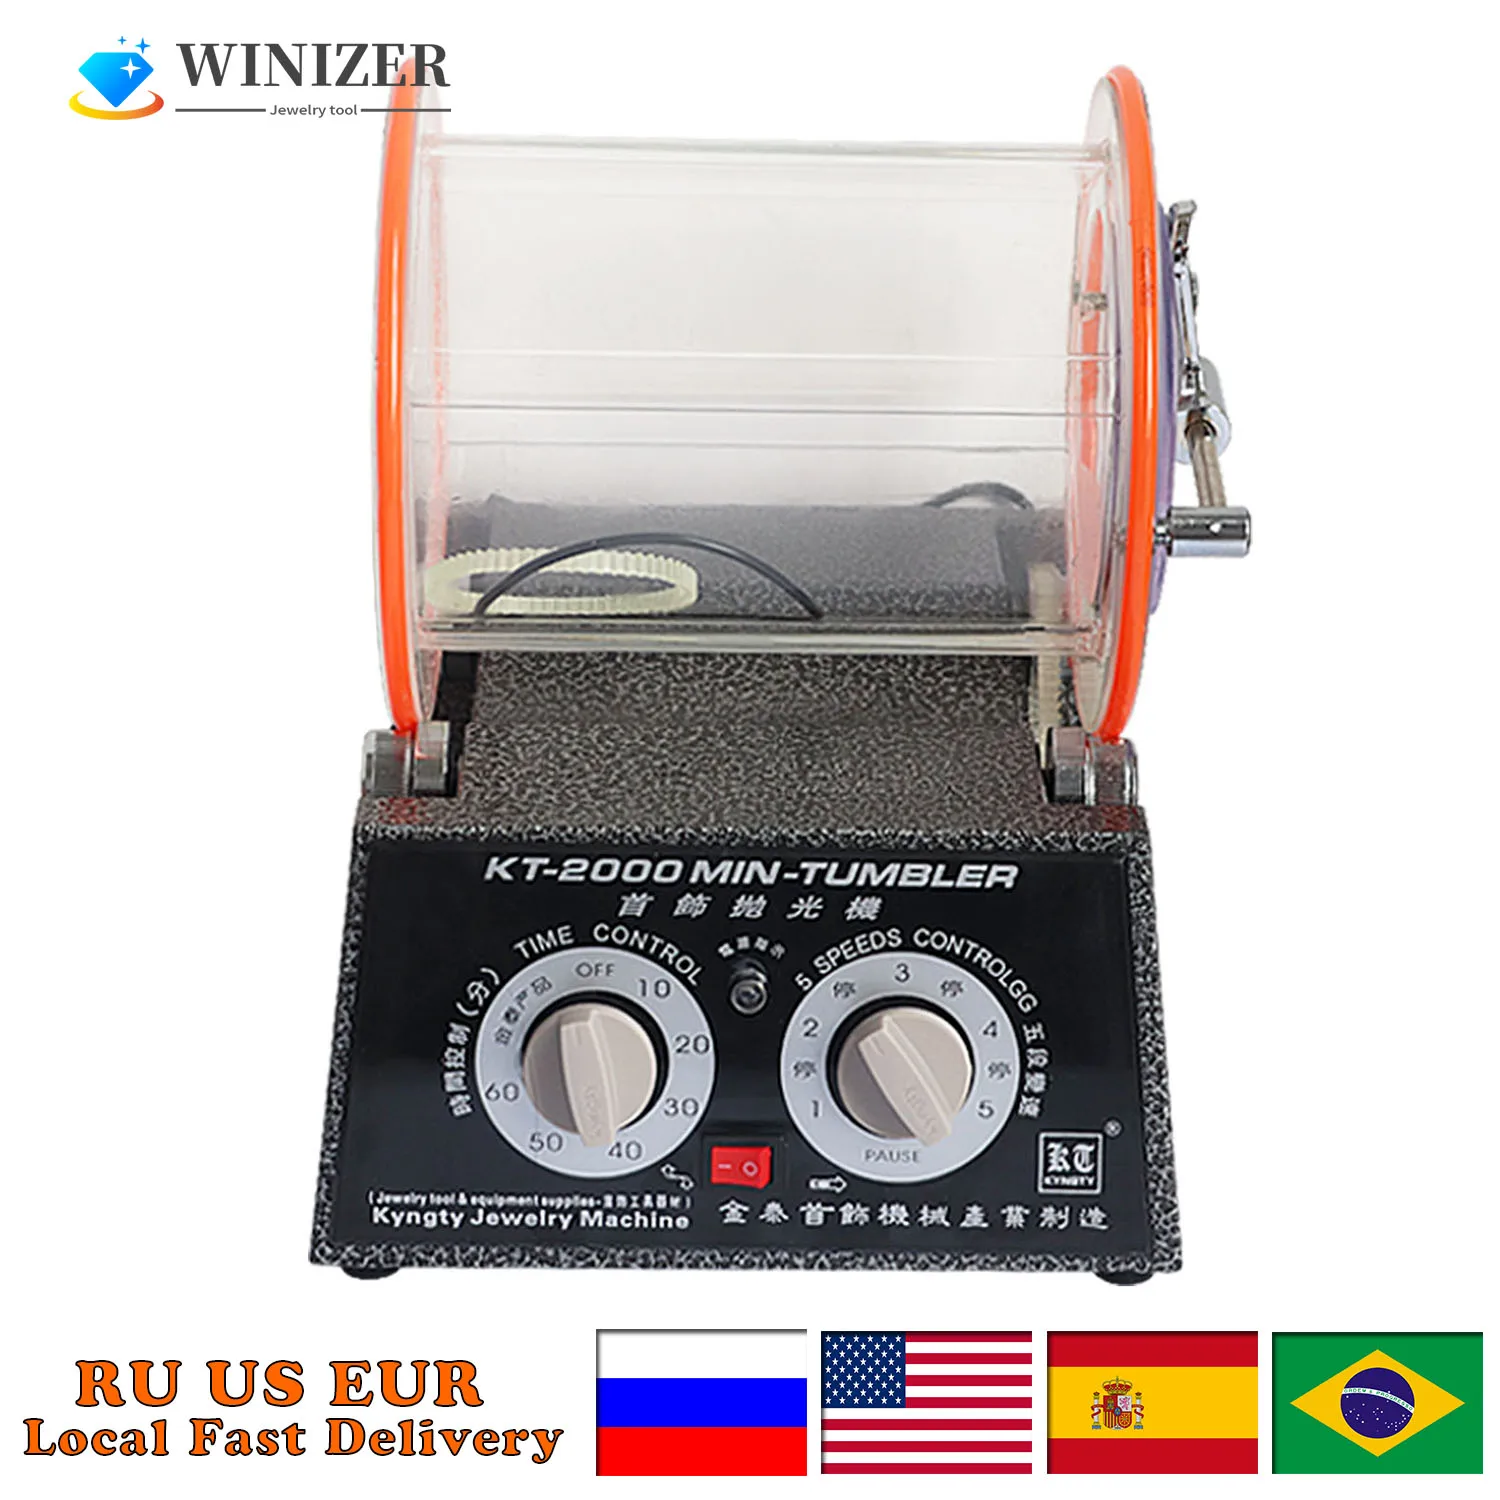 5Kg Jewelry Polisher Tumbler Machine - Mini Rotary Tumbler Timing Speed Function Surface Polisher Jewelry Cleaning Tool